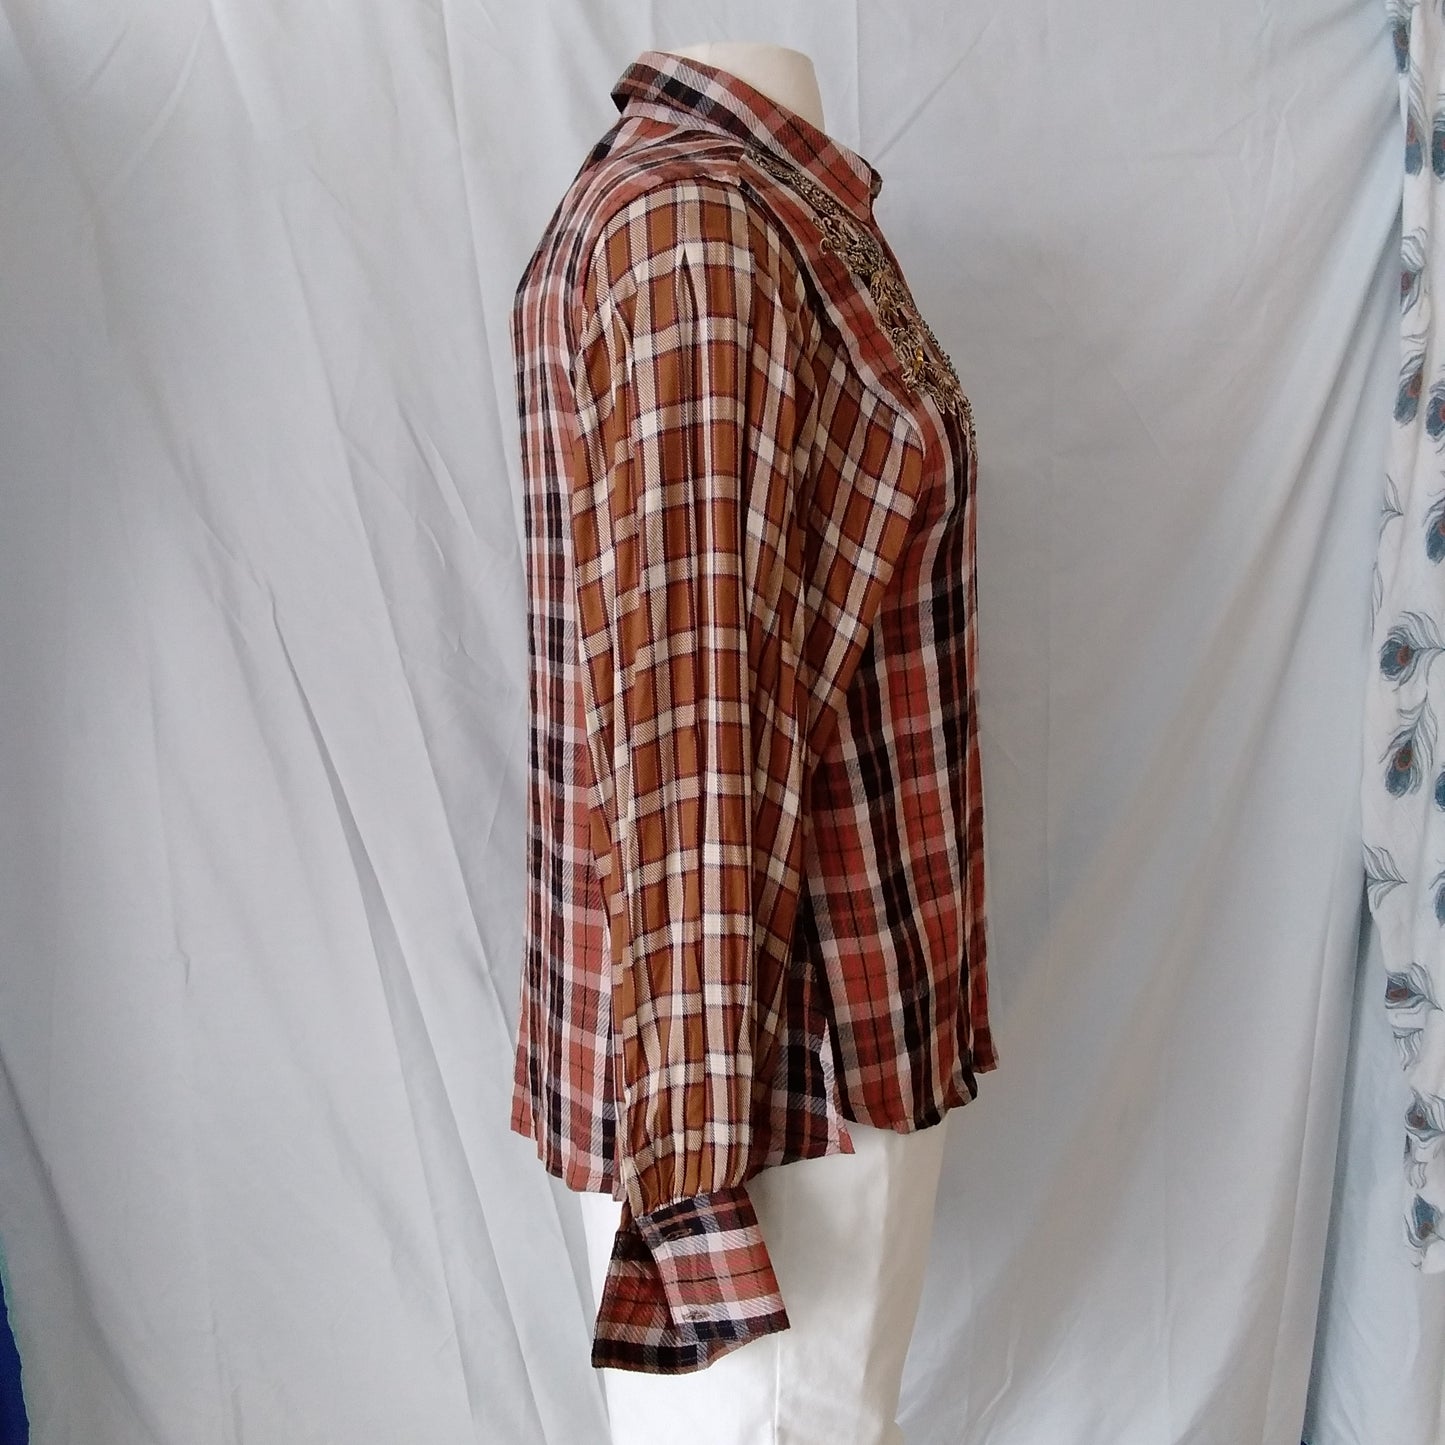 Free People - Women's Copper Plaid Shirt - Size S - NWT